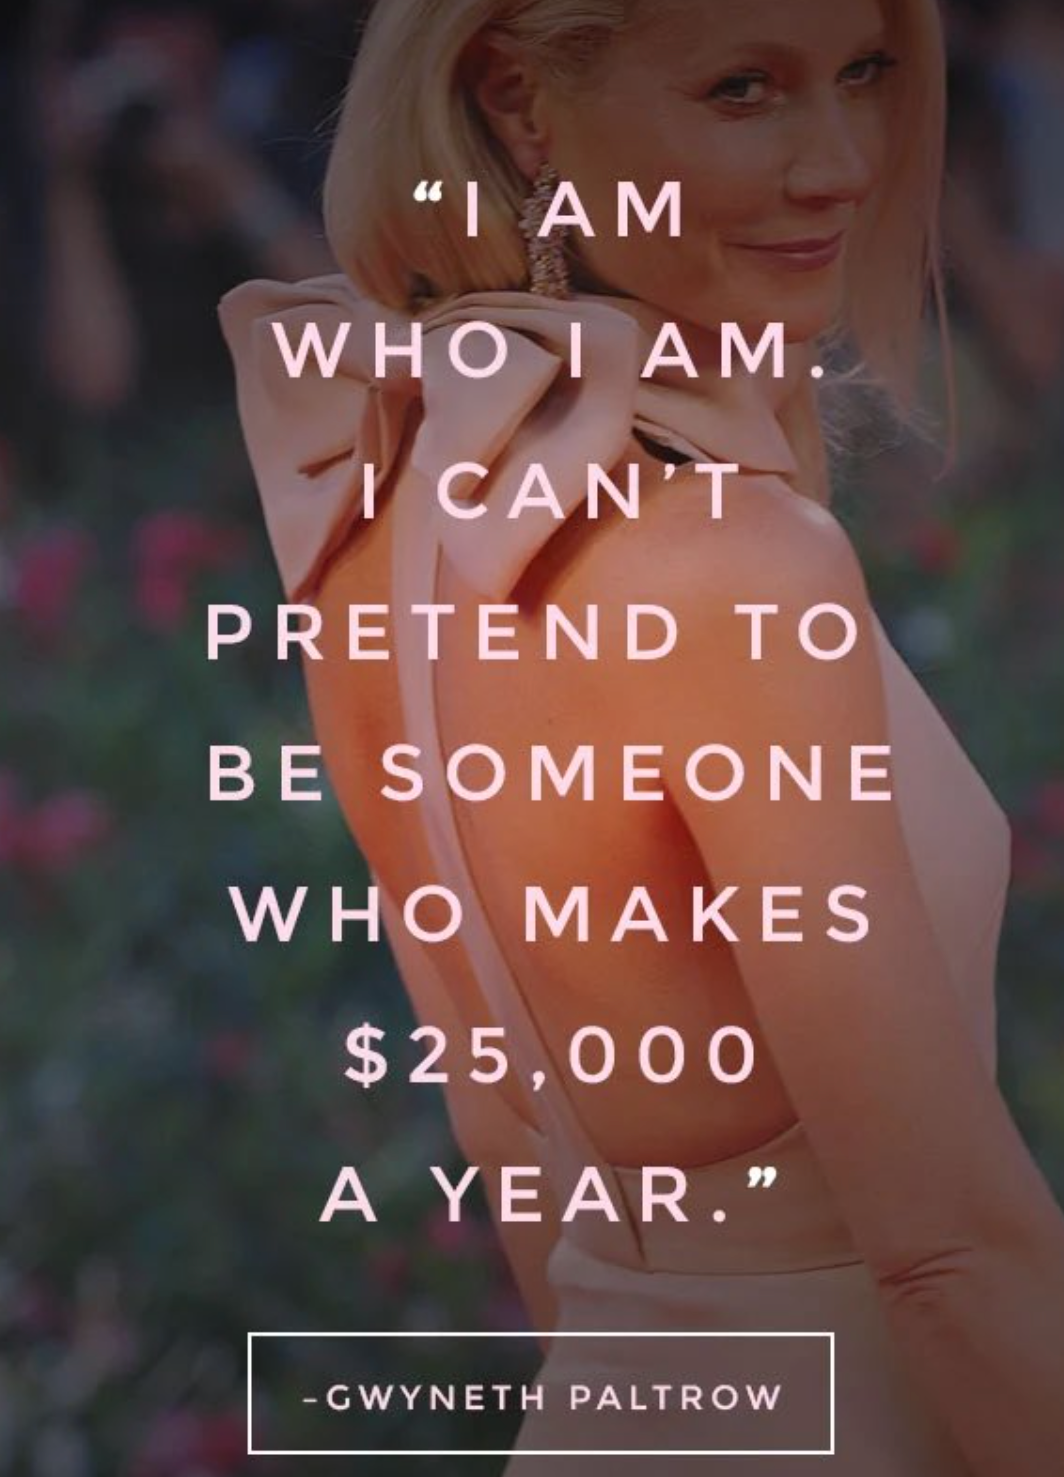 But I can pretend to be a millionaire :)